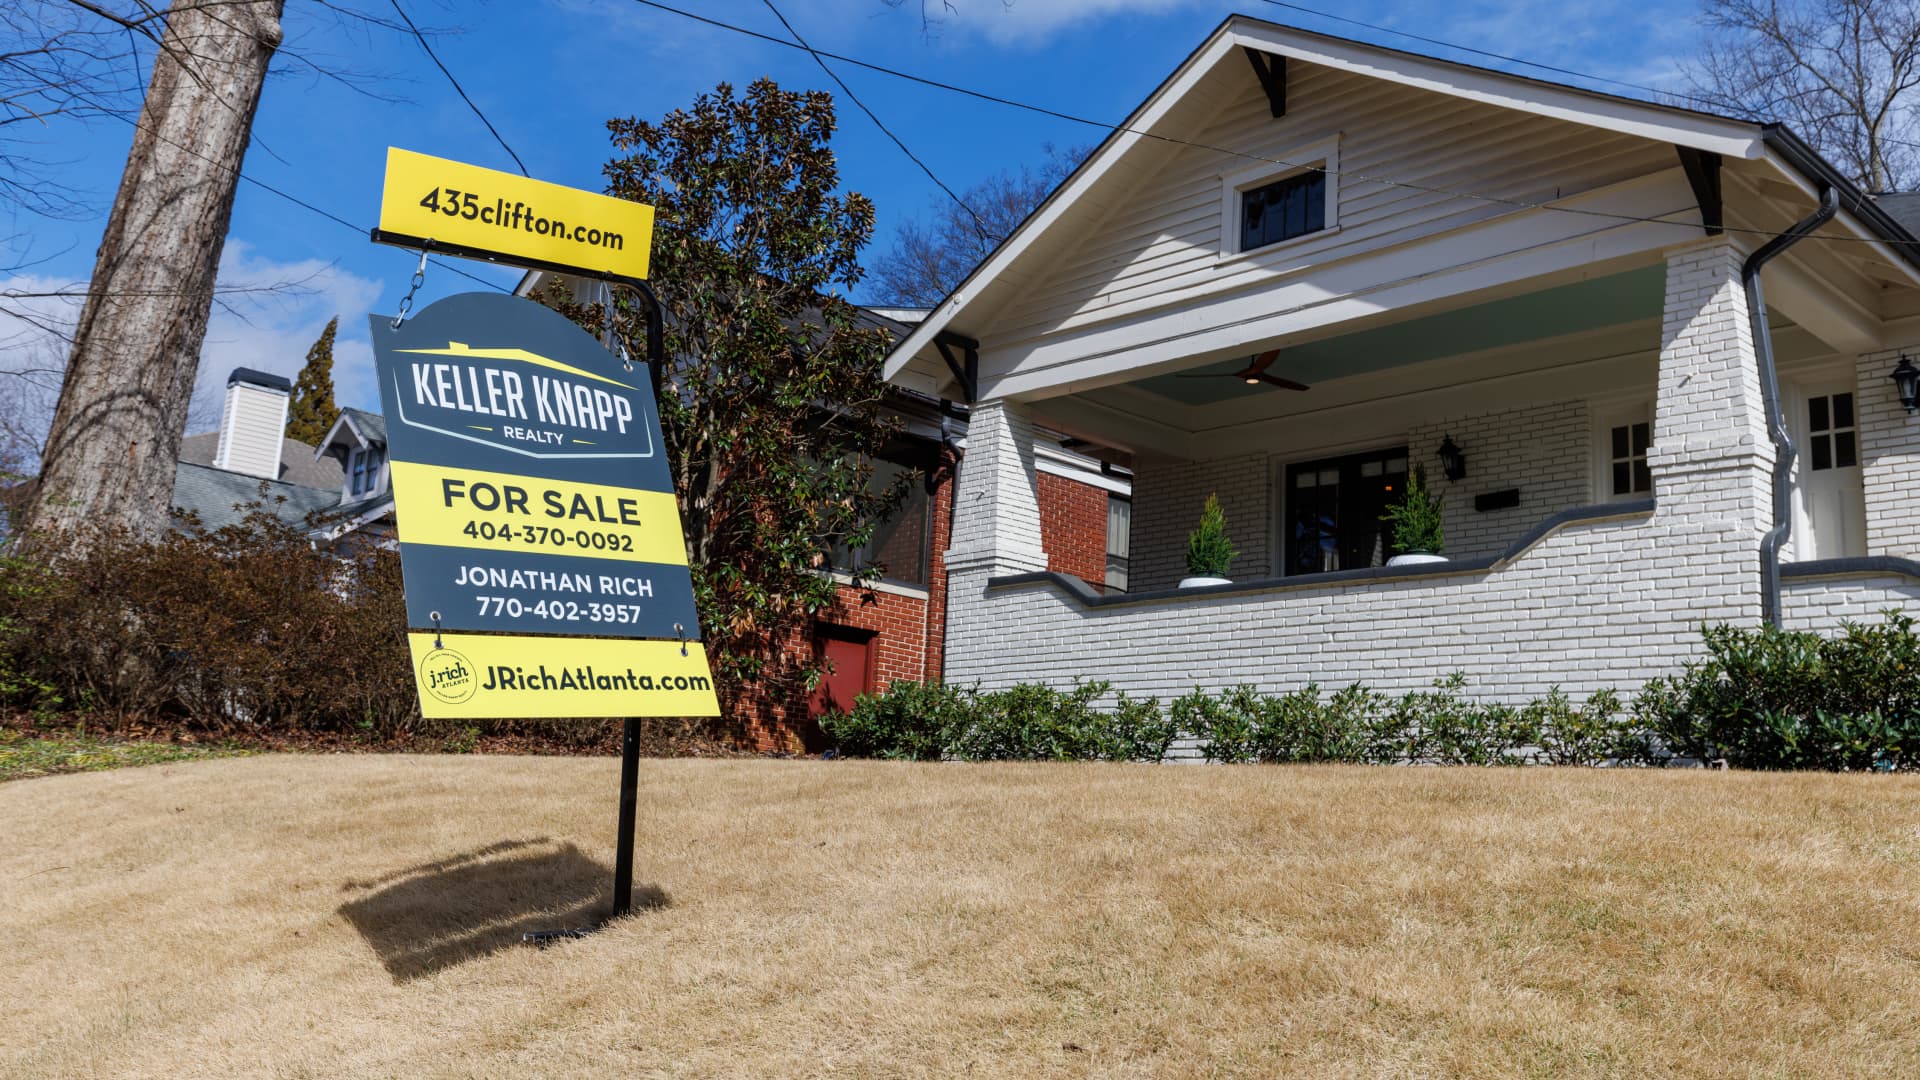 Home prices cool in January, even falling in some cities: S&P Case-Shiller